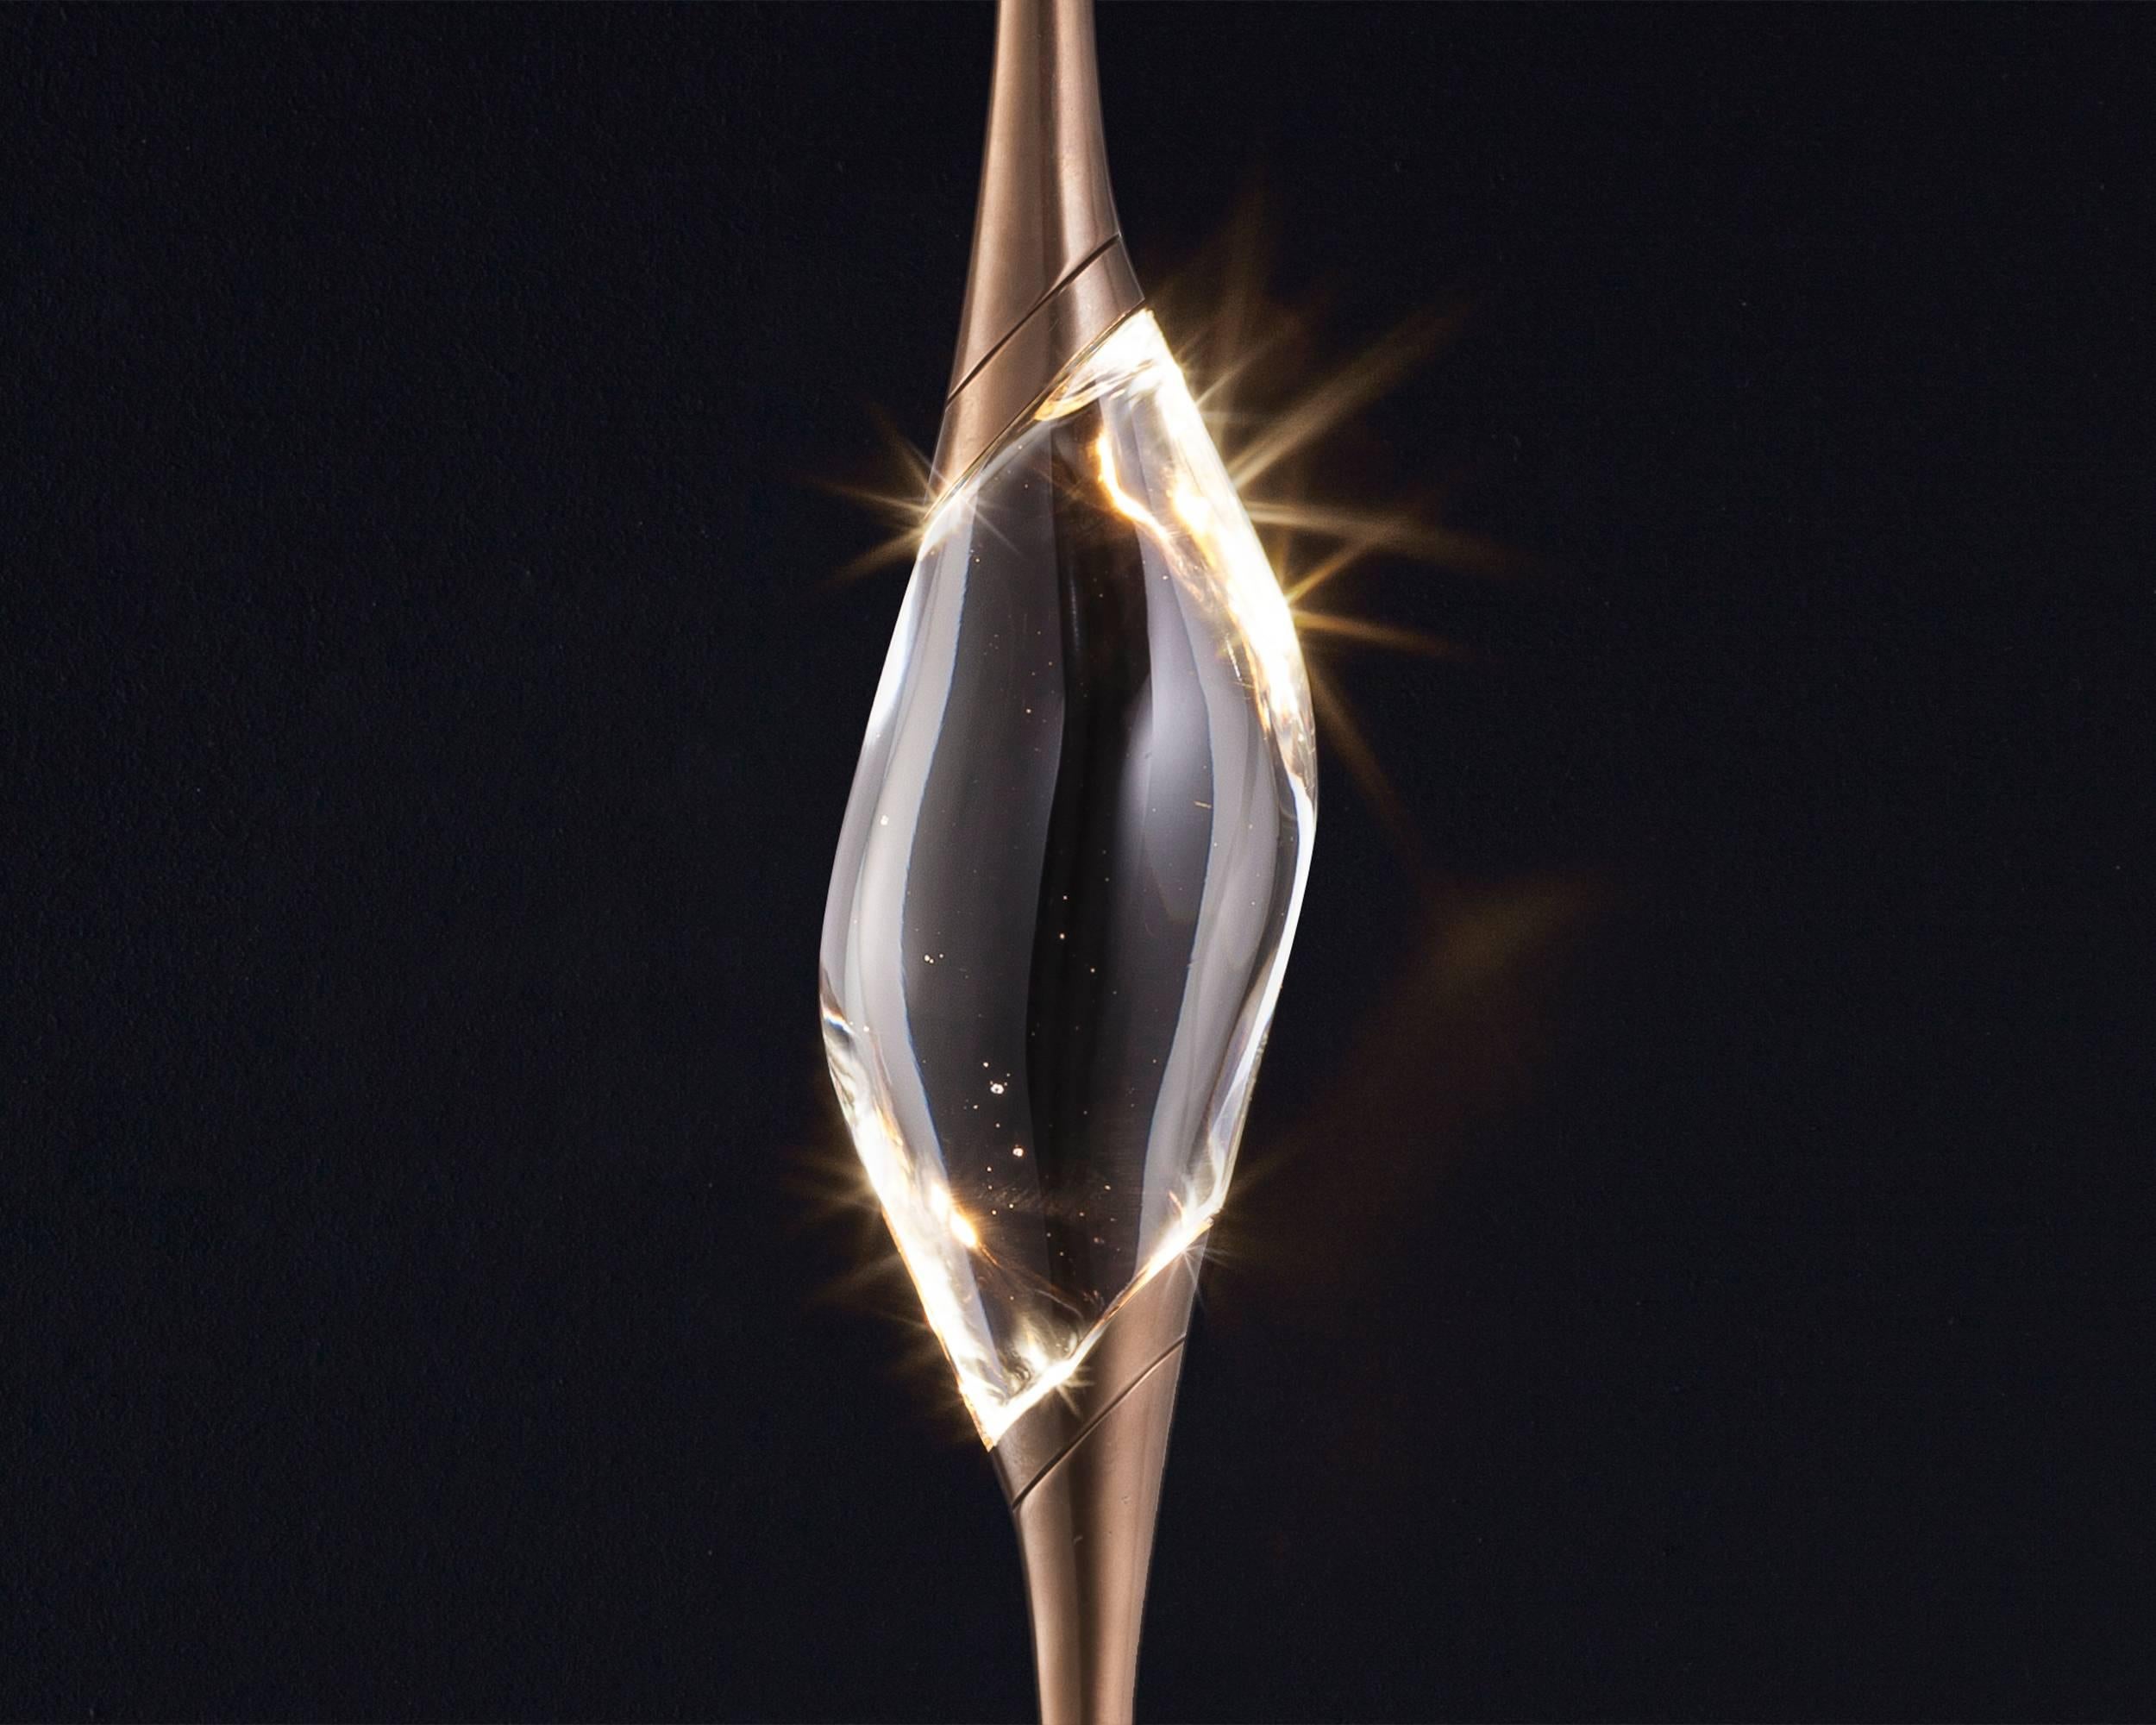 Il Pezzo 12 is a female figure suspended in the air, carrying in her womb the light. It’s nimble, refined, addictive. The solid crystal, illuminated by LEDs, creates suggestive refractions and it’s suspended between brass stems finished in